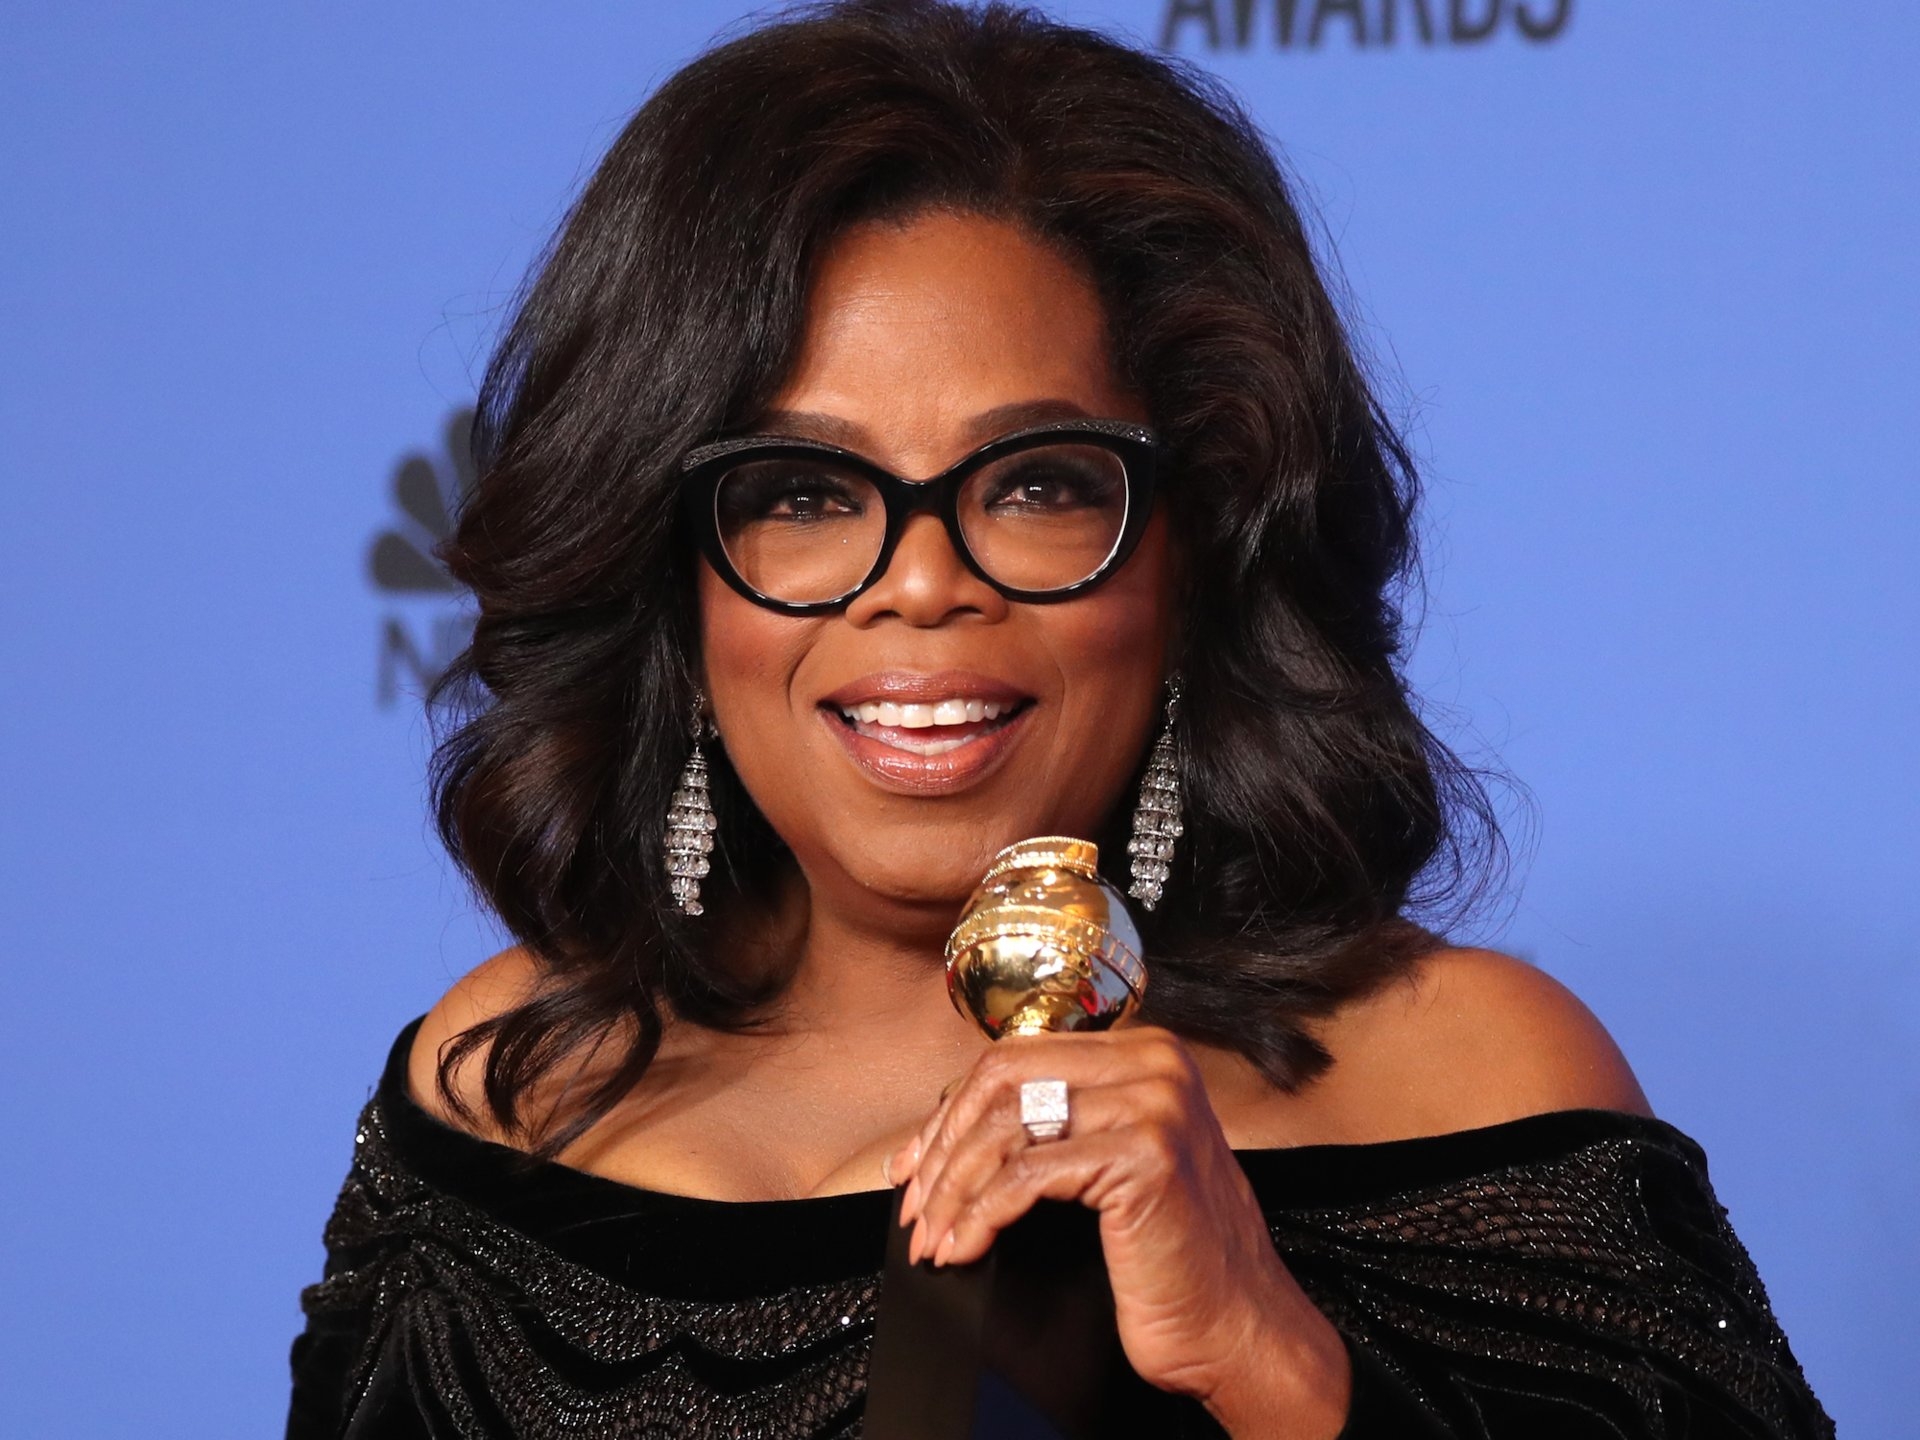 The life and career of Oprah Winfrey, who was nominated for an Oscar and lives in a $52 million estate nicknamed ‘The Promised Land’